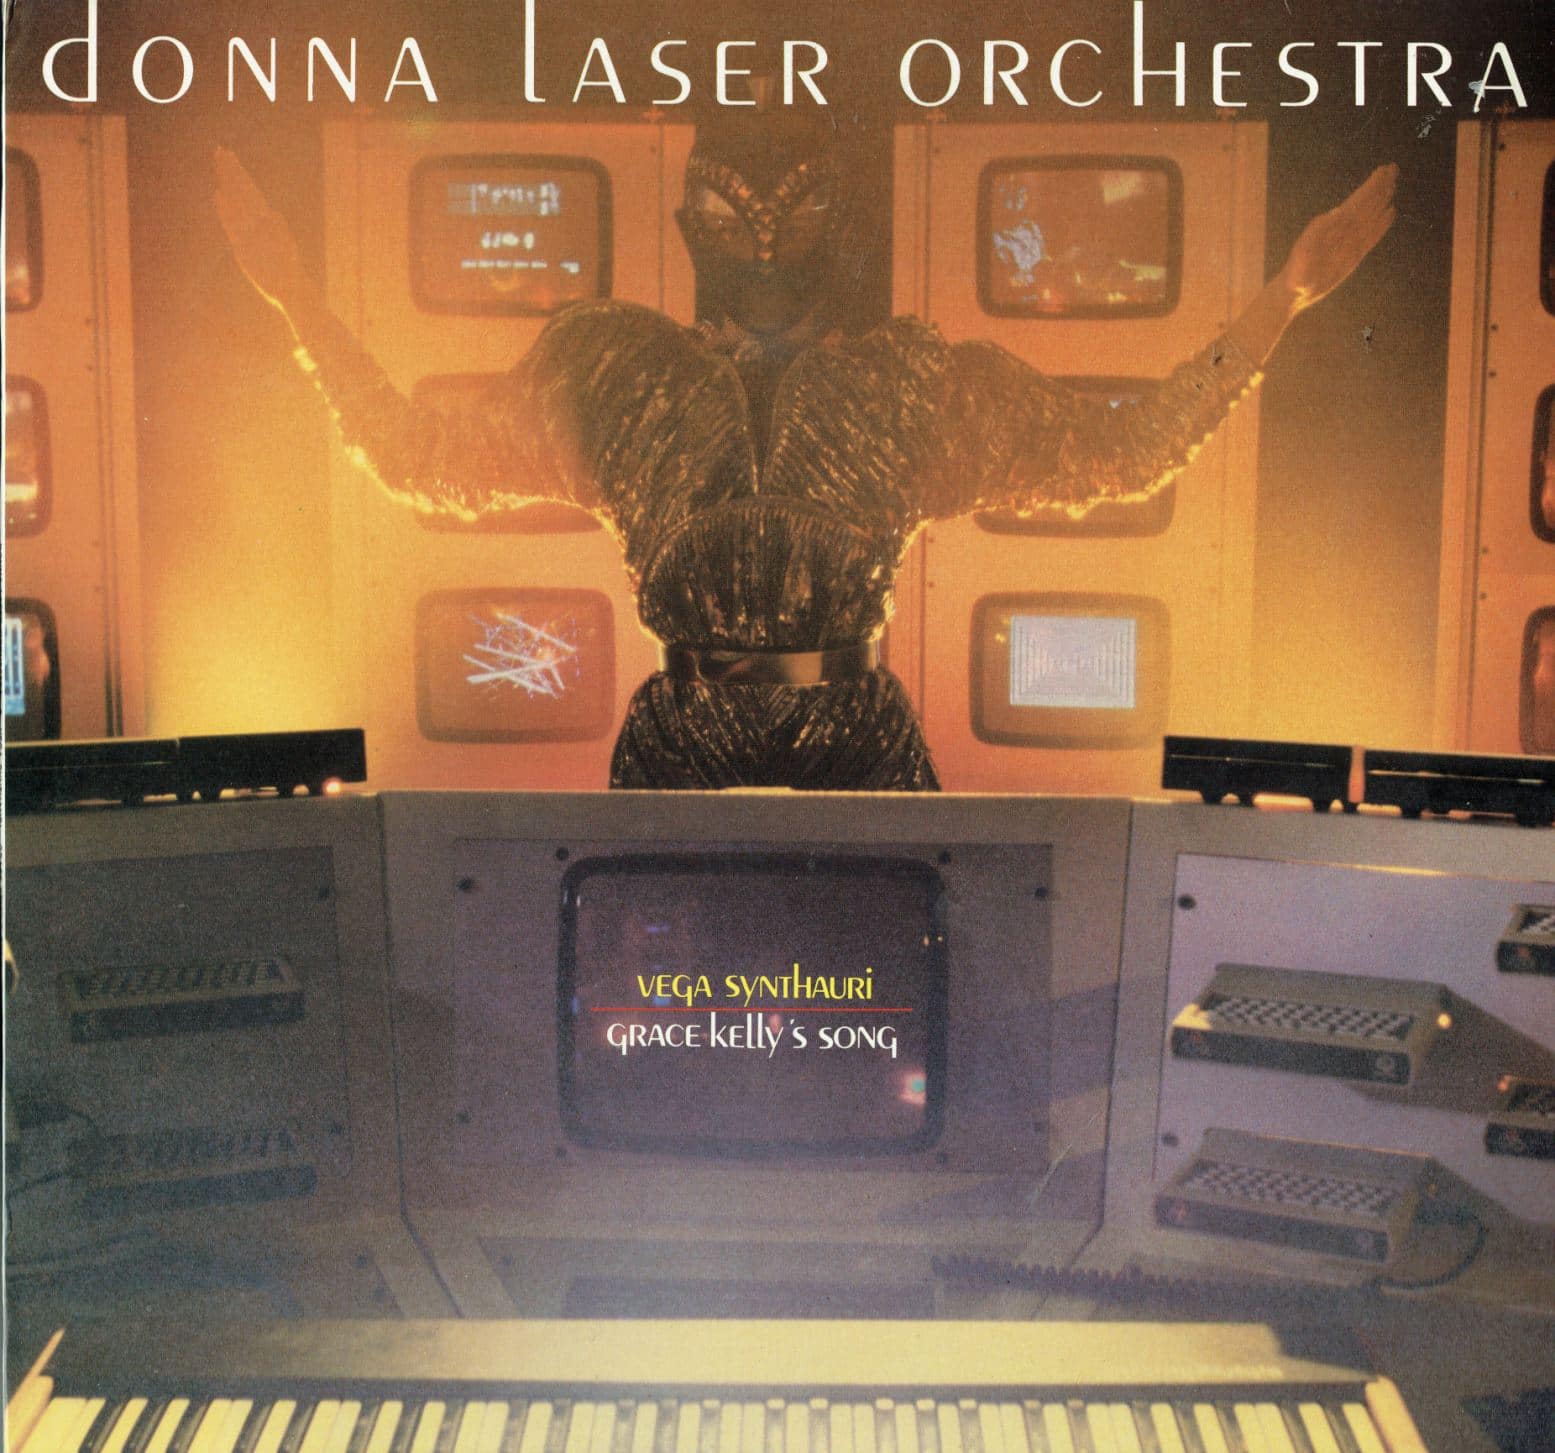 Donna Laser Orchestra - Vega Synthauri / Grace Kelly's Song - BSTX085 - BEST RECORDS ITALY